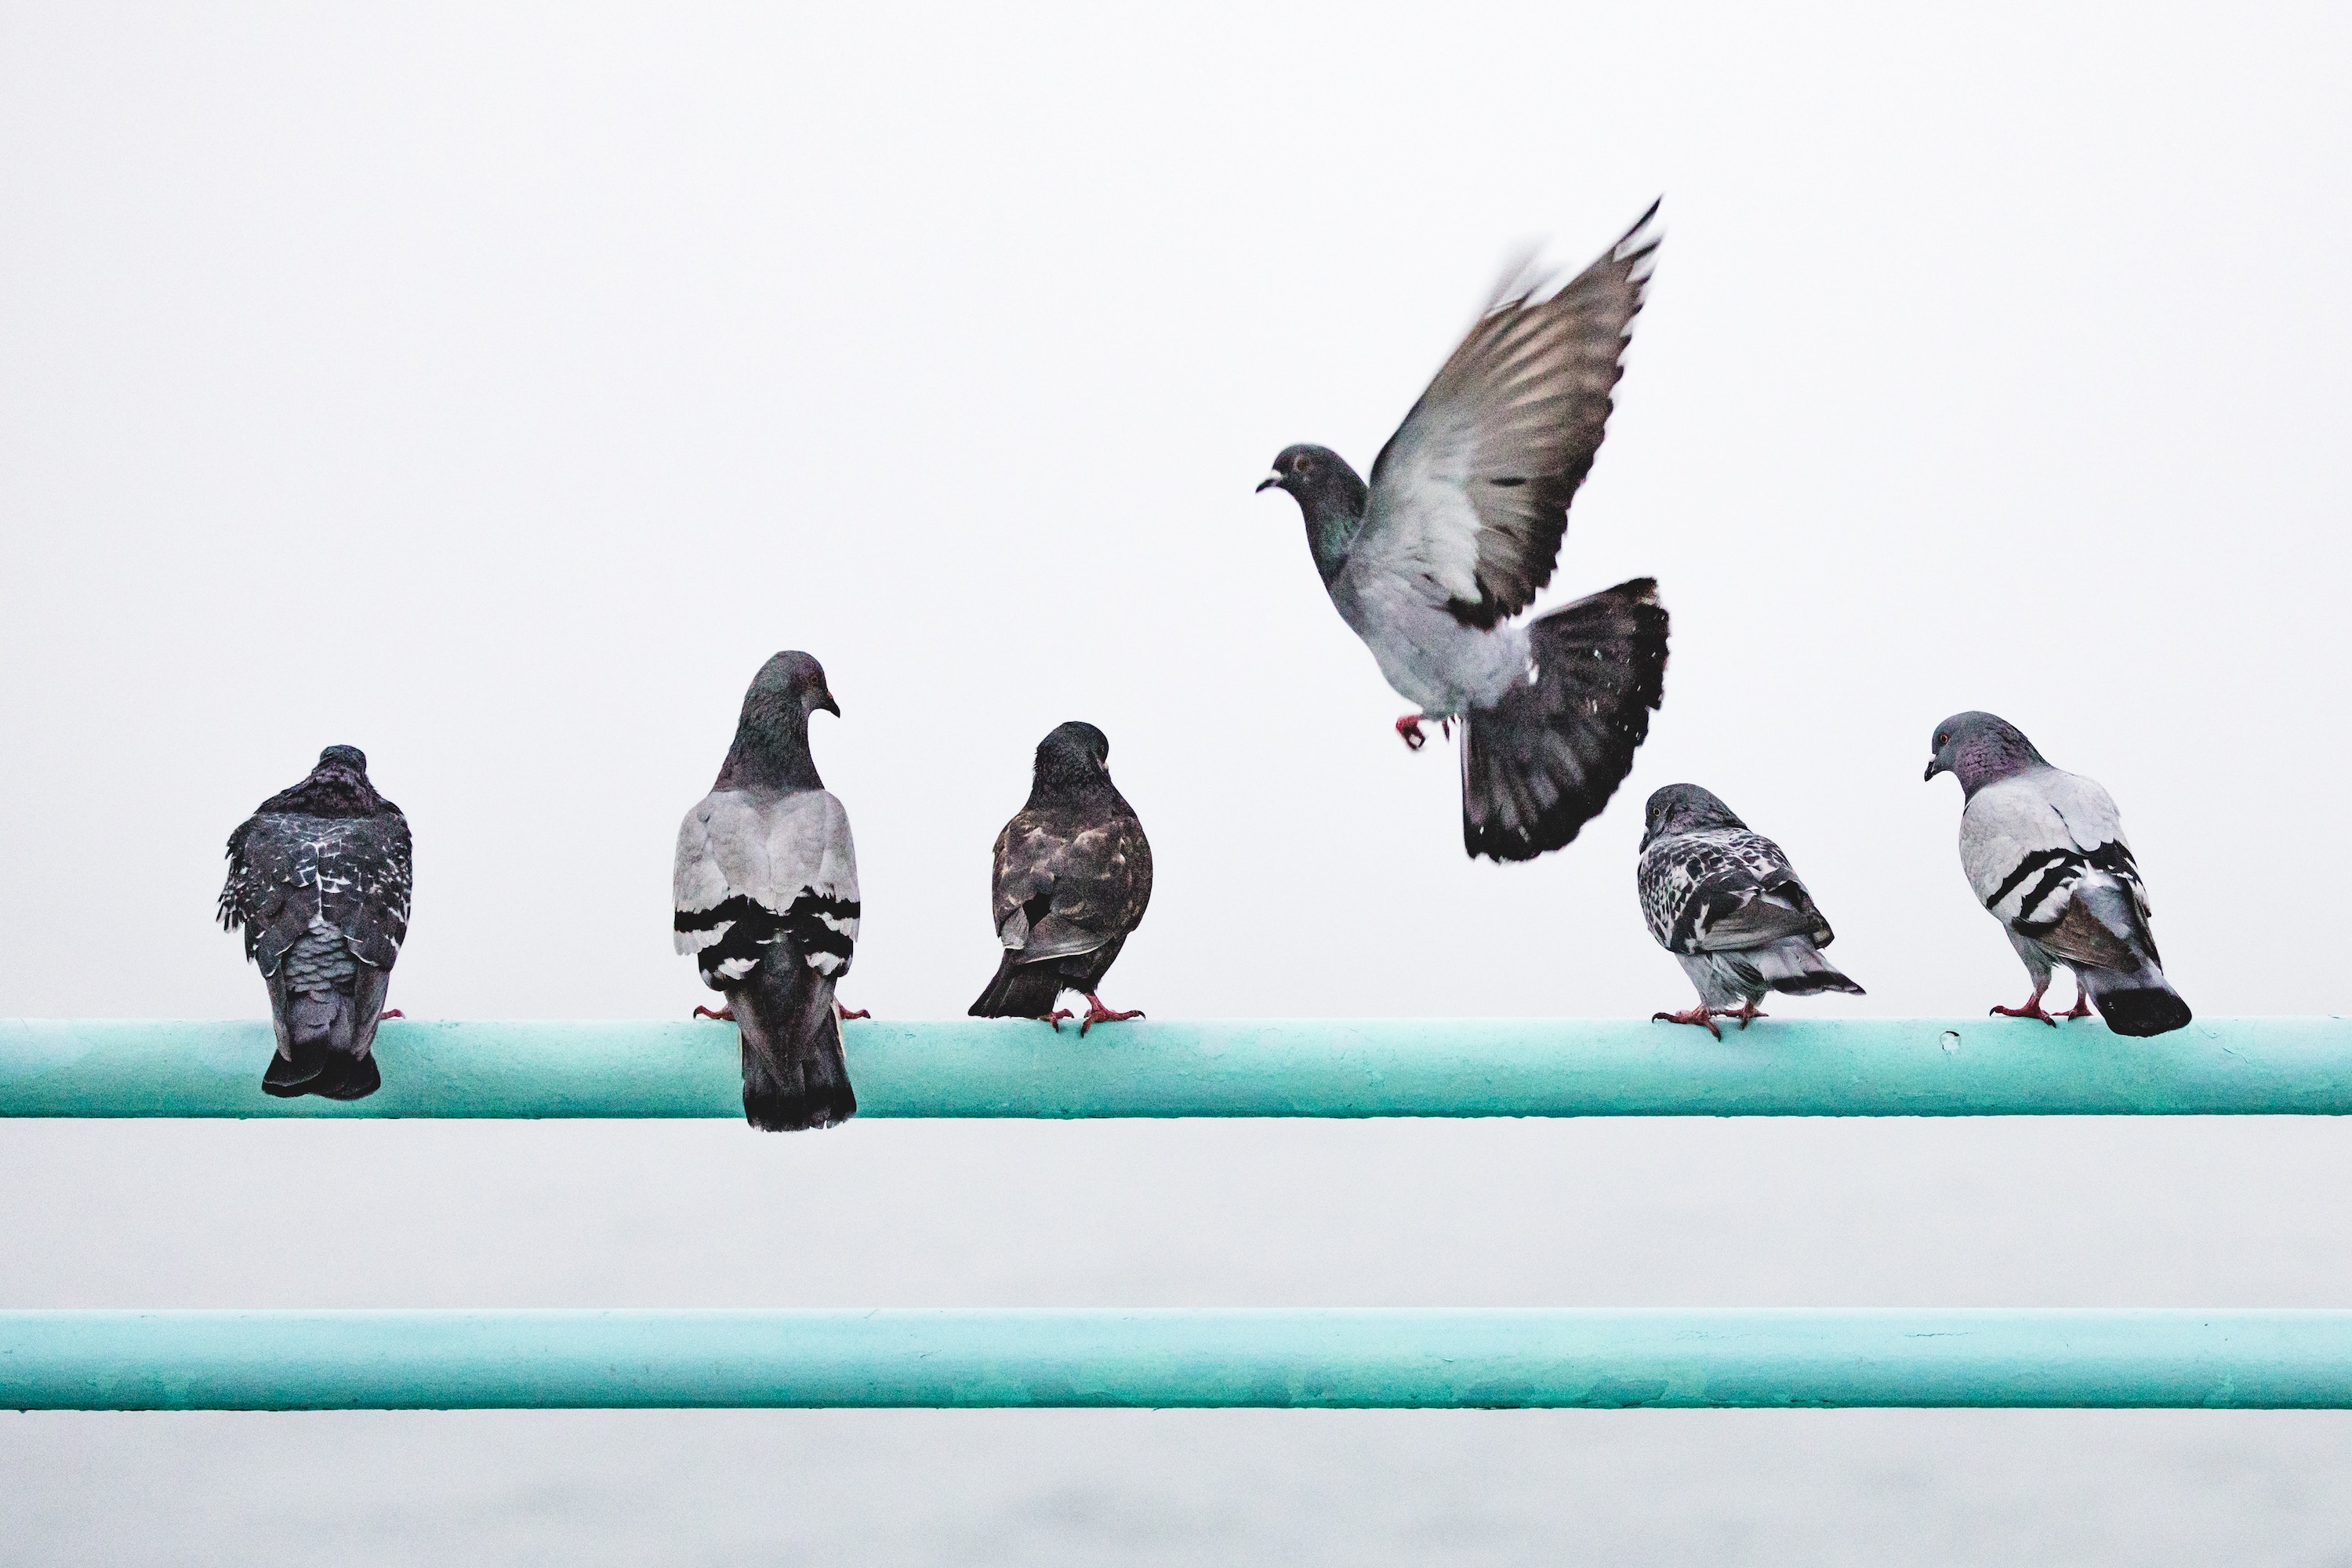 Pigeons on a wire